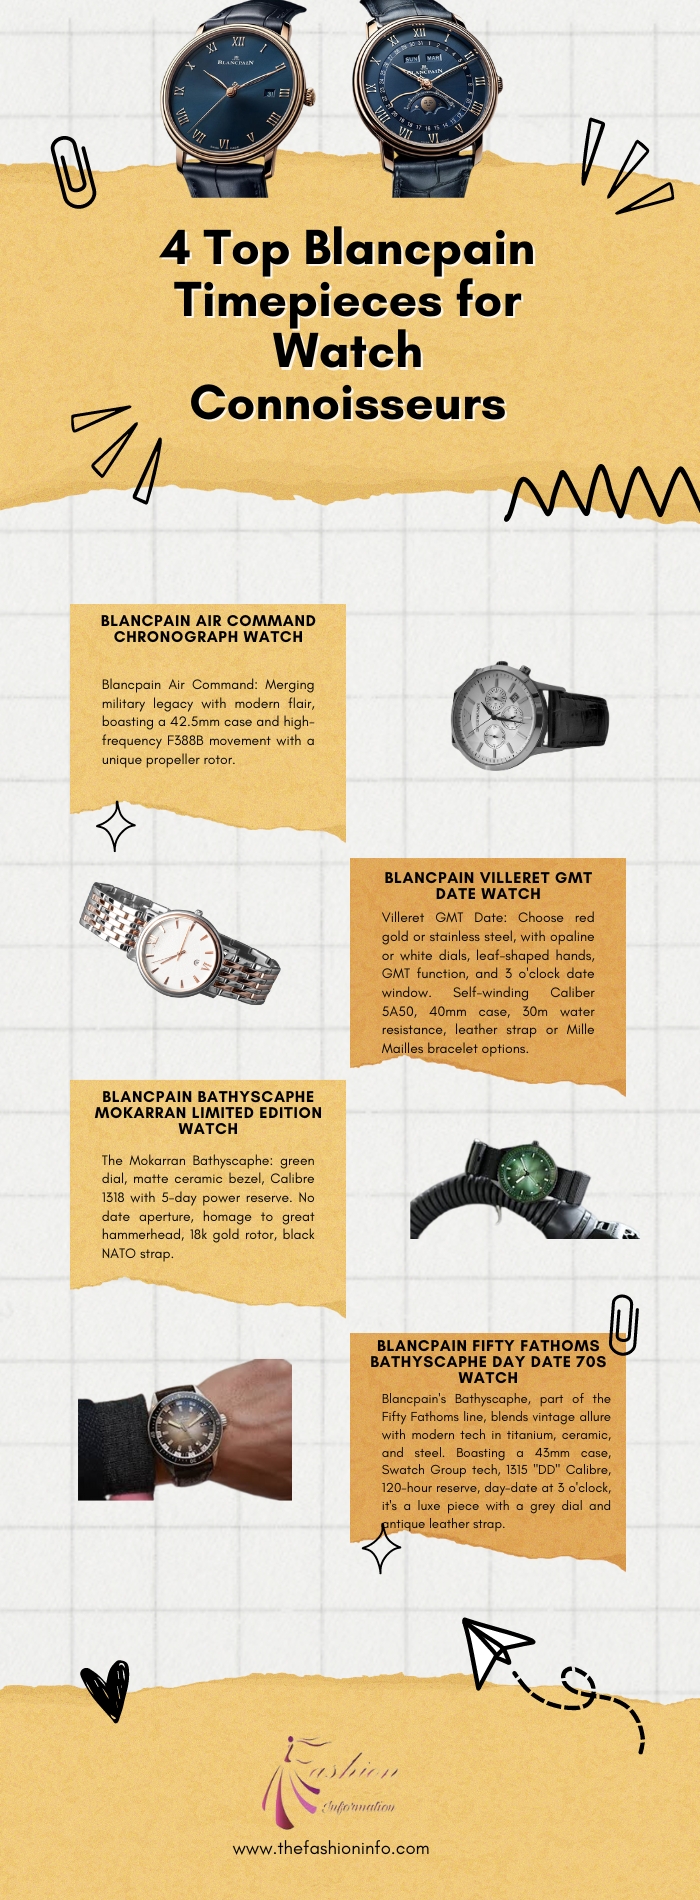 4 Top Blancpain Timepieces for Watch Connoisseurs